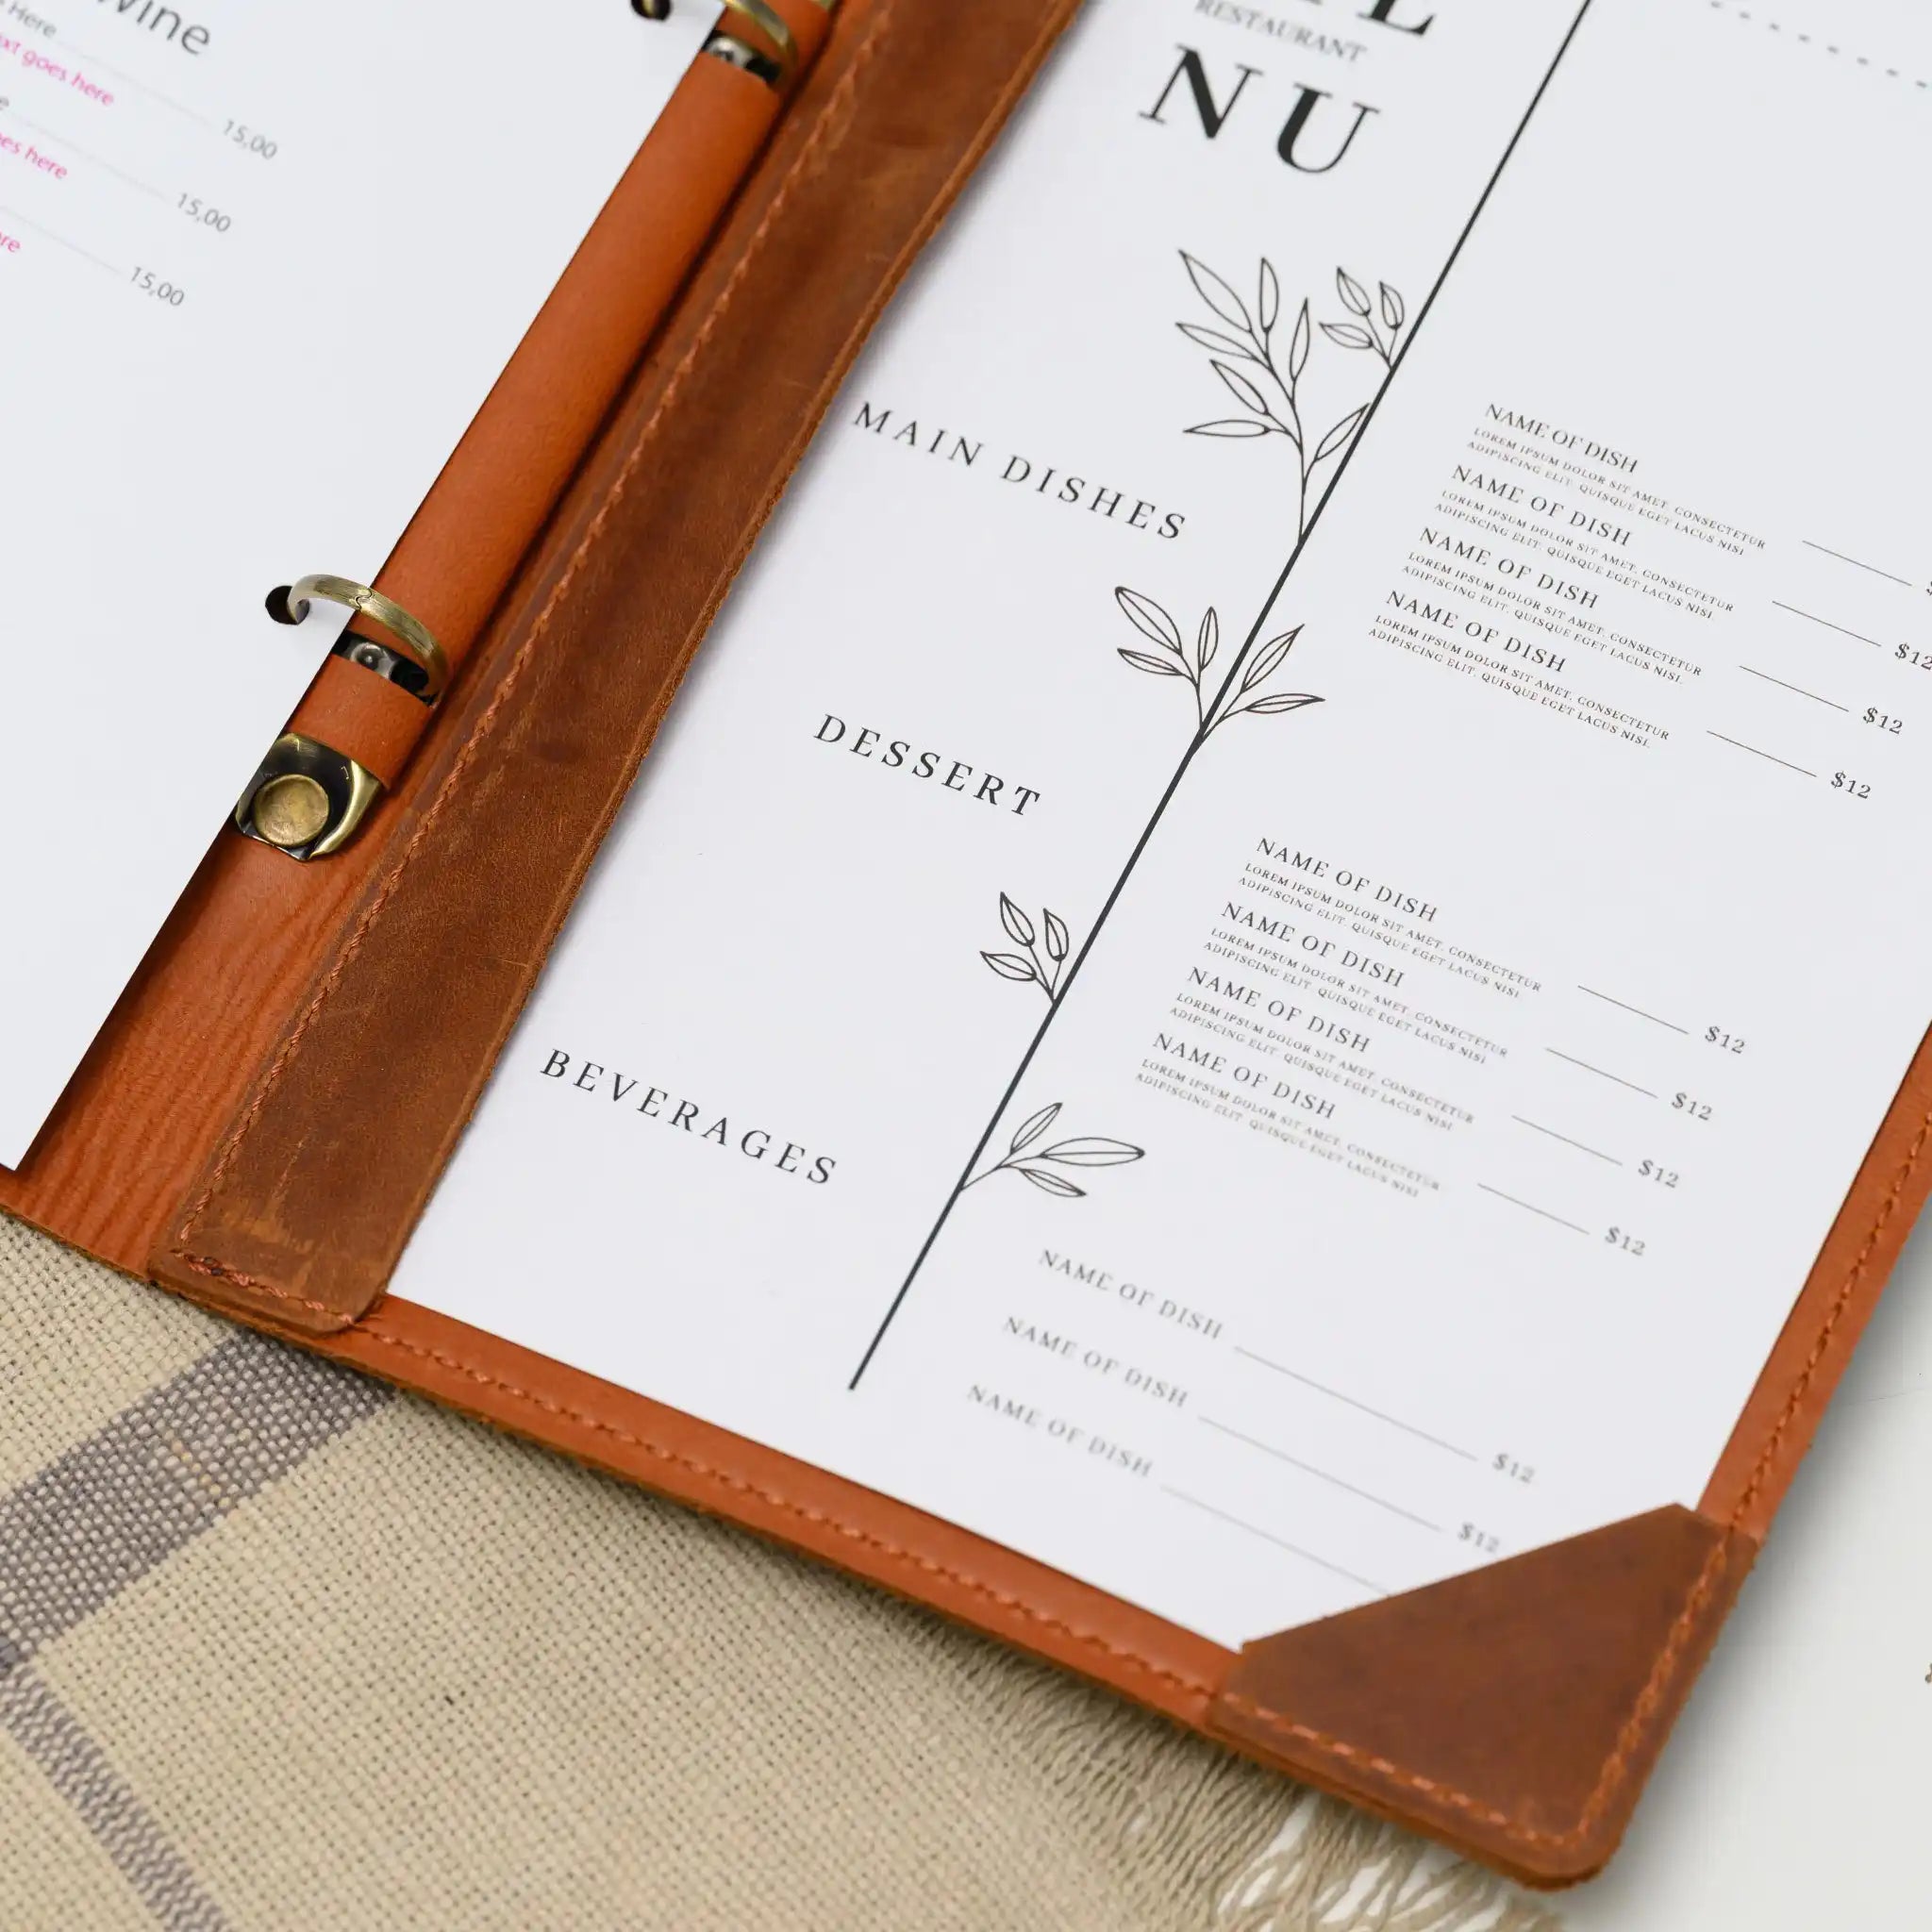  Present your menu with pride using our handcrafted menu, meticulously made with logo embossing for a bespoke finish.